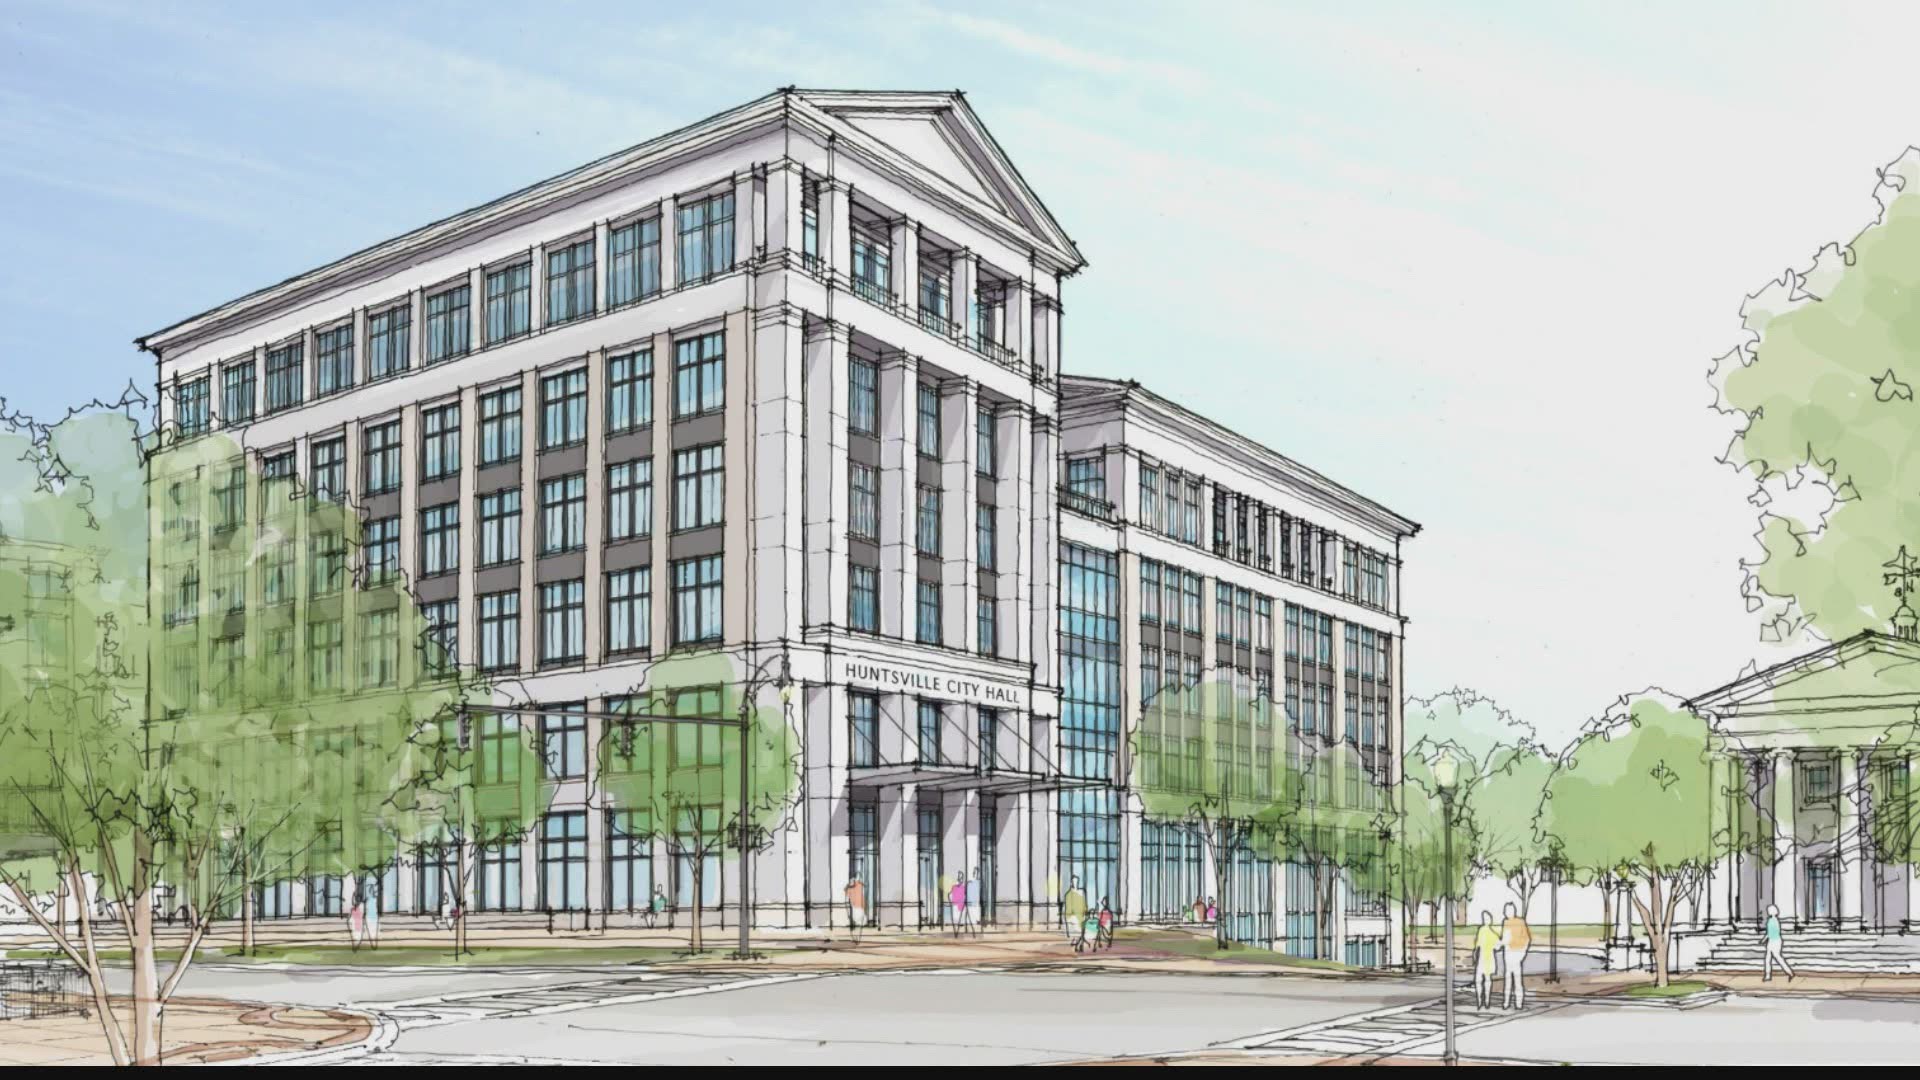 The new City Hall building is one step closer to becoming a reality.